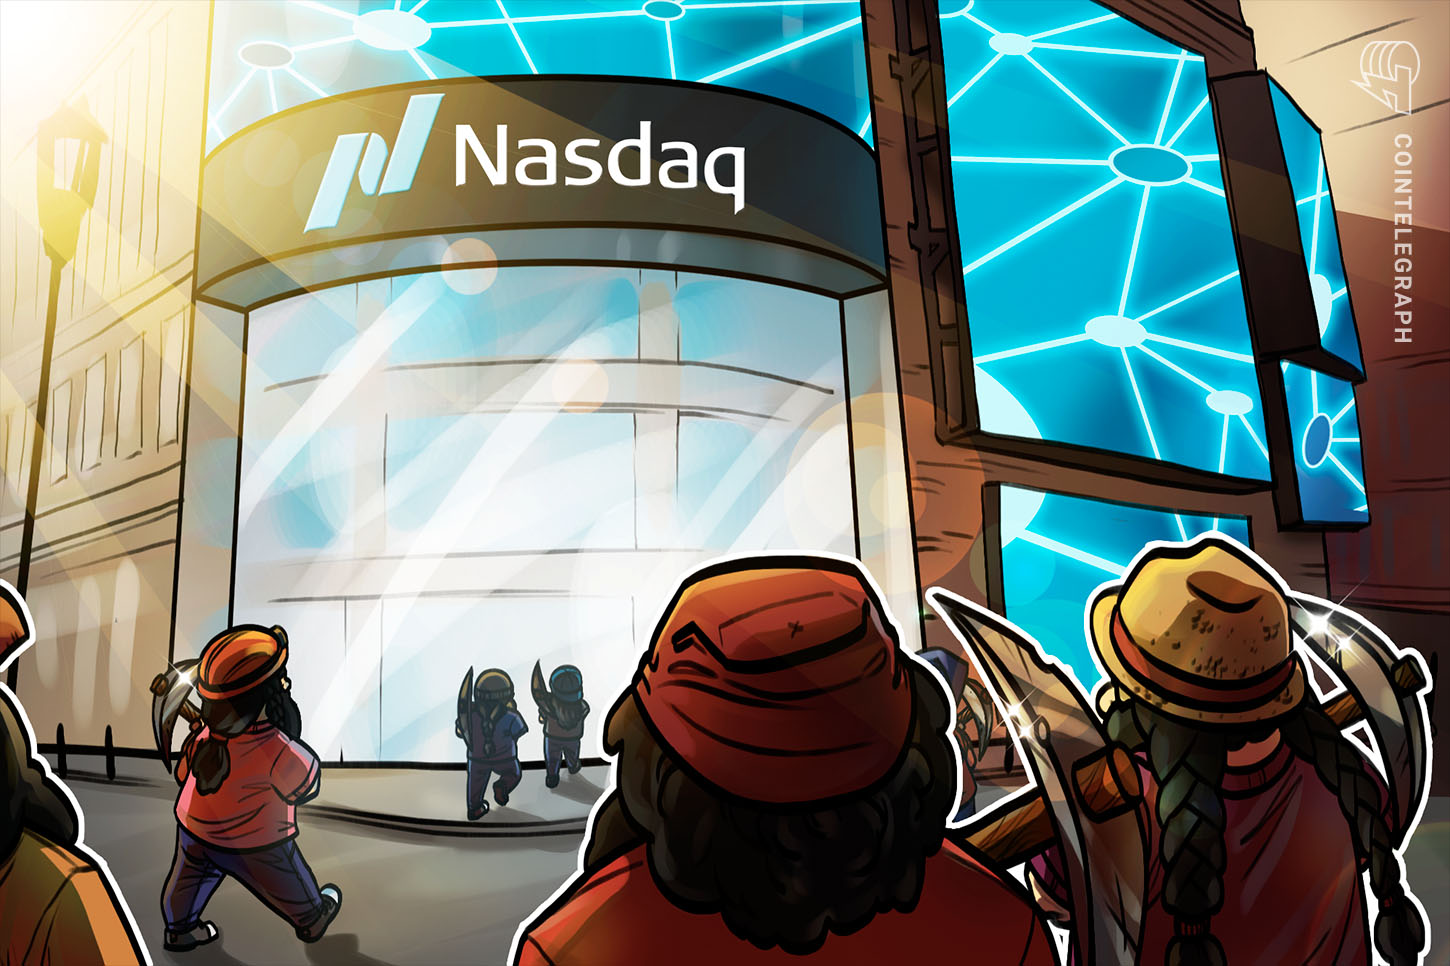 Listed agency sells $14M of shares for 1 EH/s in Bitcoin mining energy